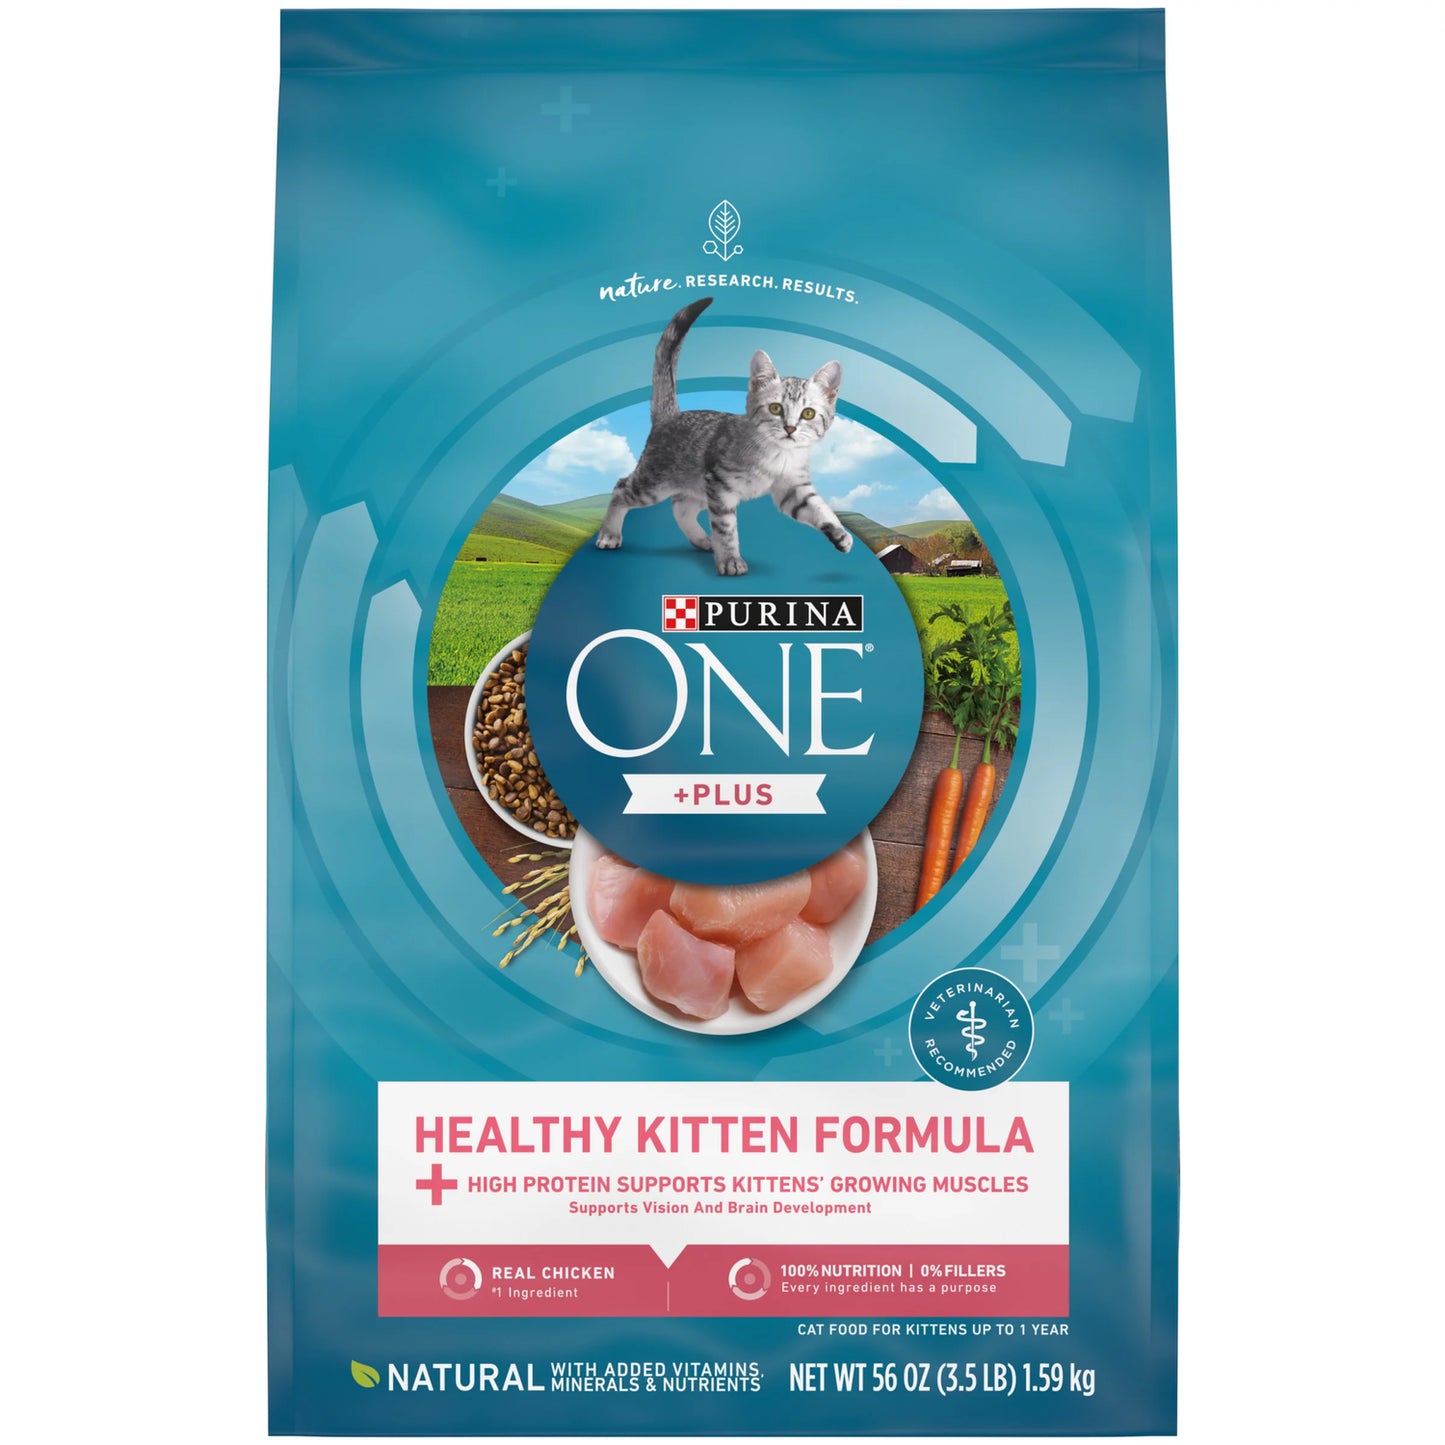 Purina ONE High Protein, Natural Dry Kitten Food, +Plus Healthy Kitten Formula, 3.5 Lb. Bag